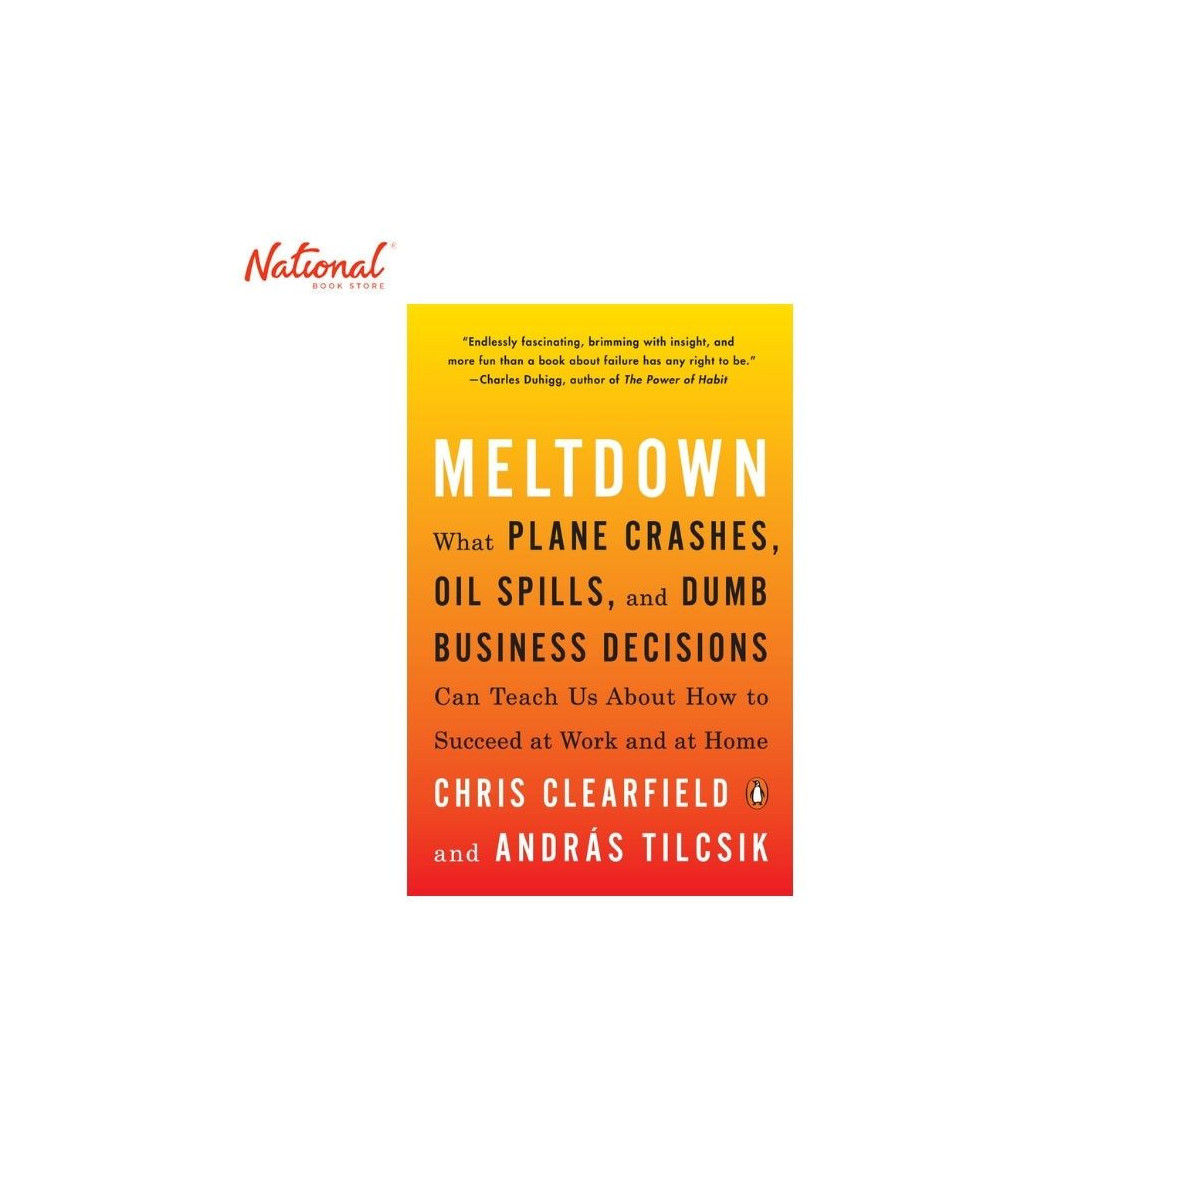 Meltdown Trade Paperback by Chris Clearfield and András Tilcsik